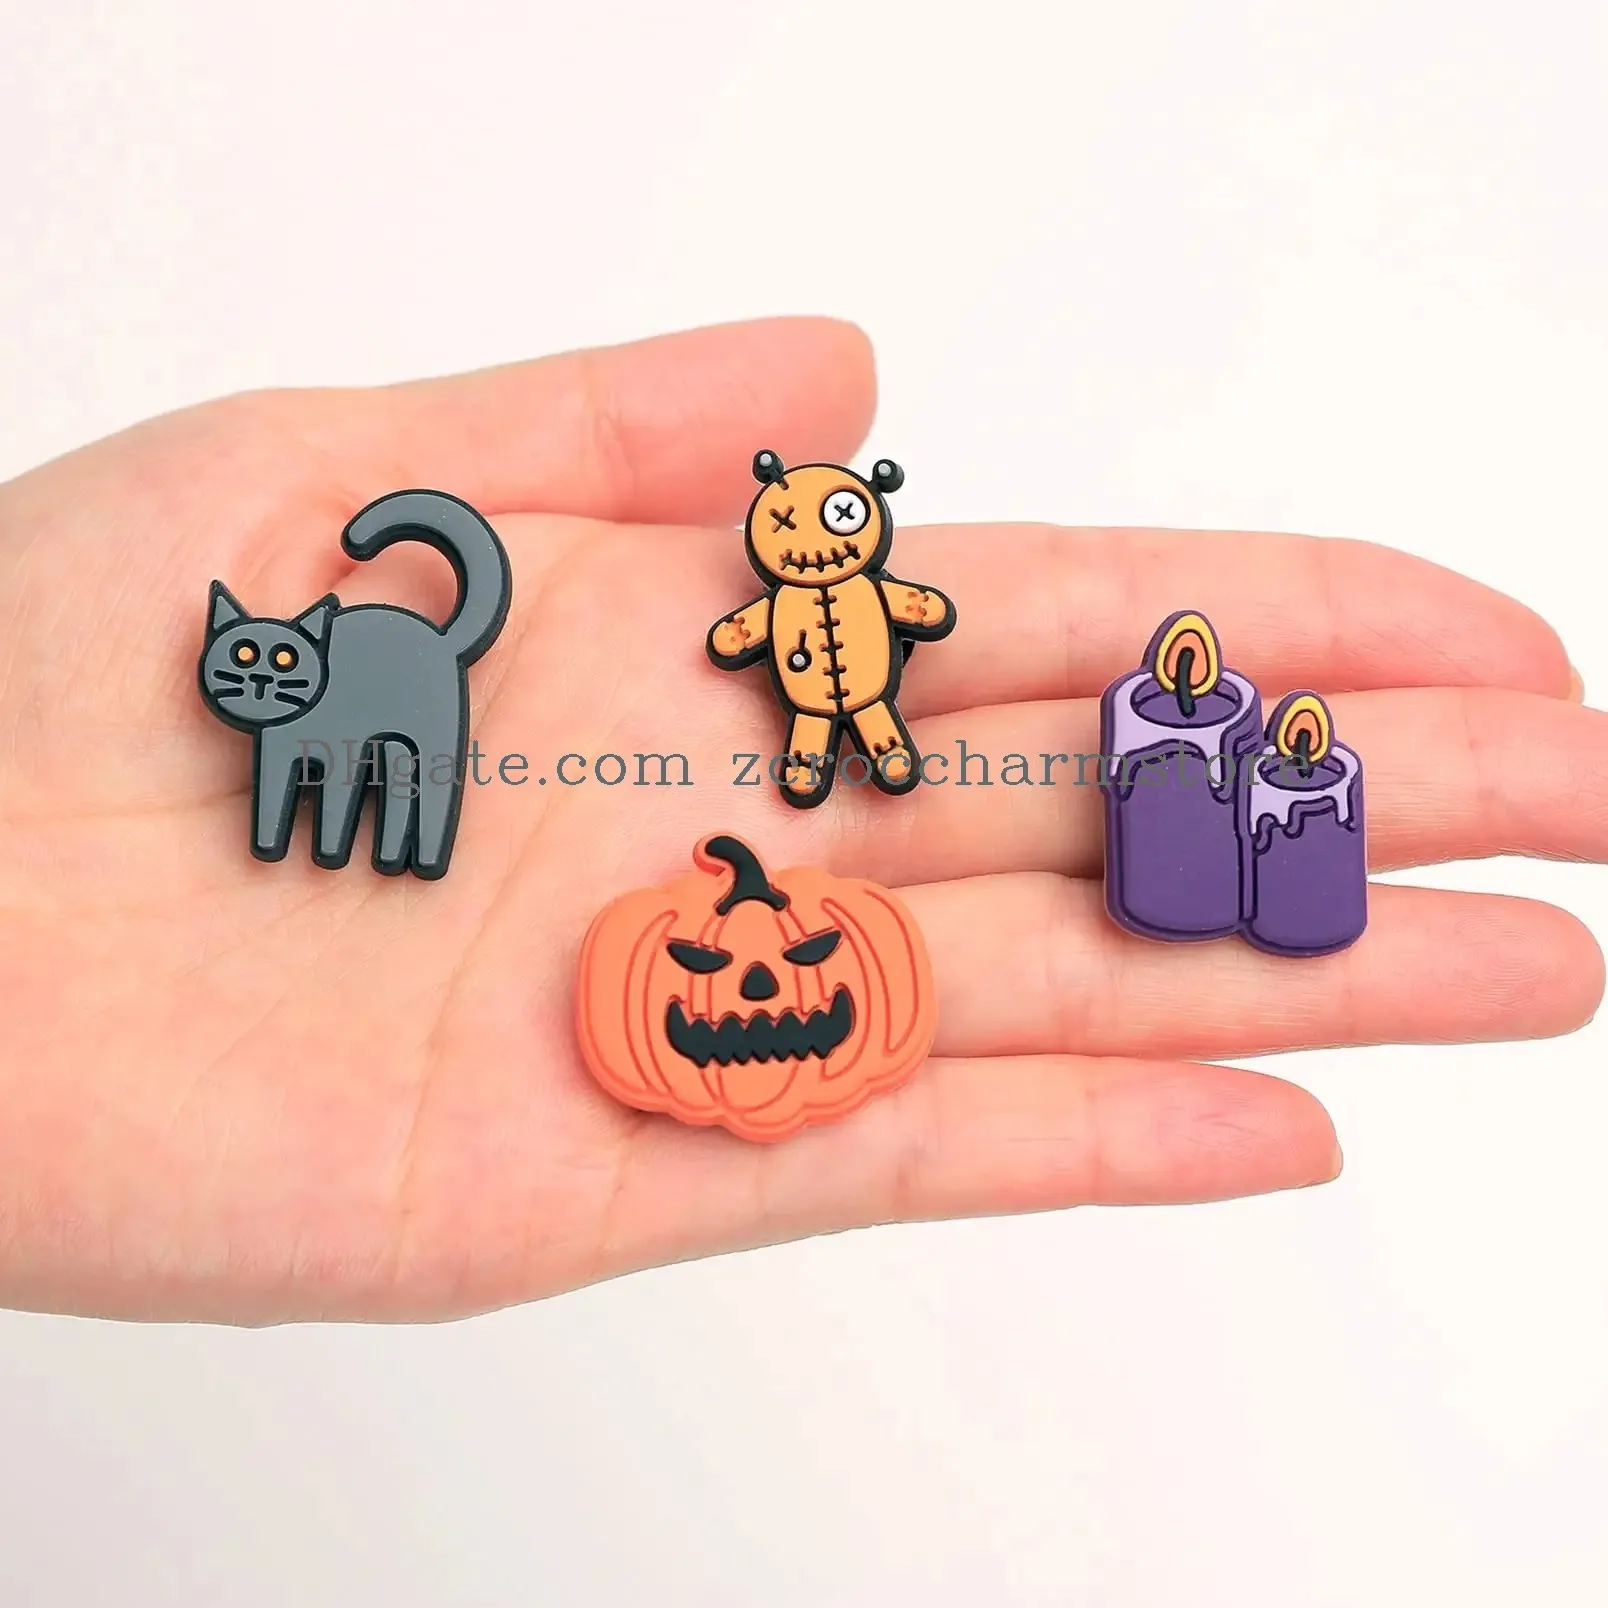 3ml halloween theme shoe charms includes glow in the dark perfect for shoes sandal clog wristband decorations halloween decorations and party favors for women men and kids